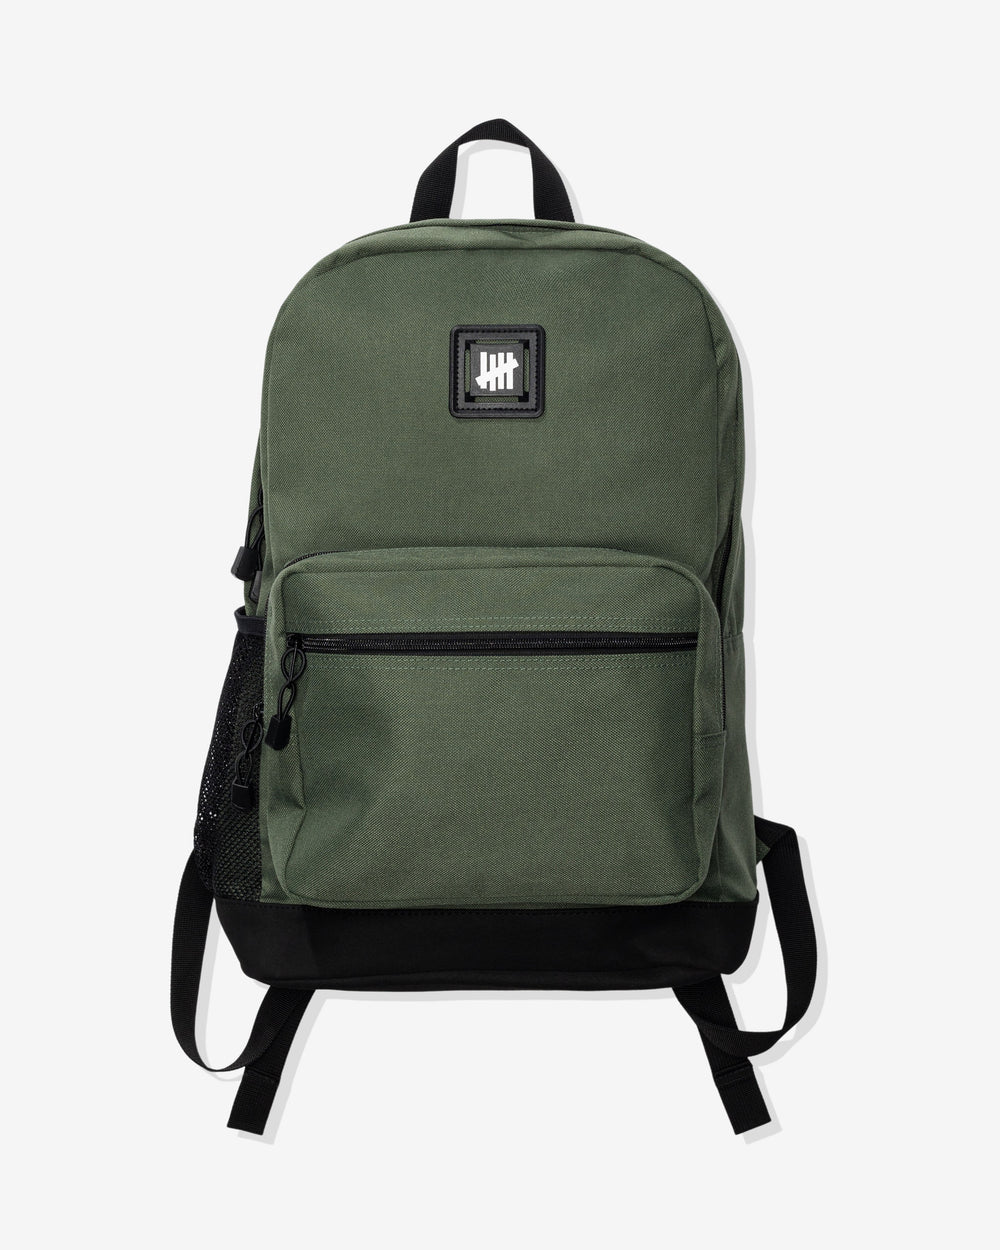 UNDEFEATED CANVAS BACKPACK - OLIVE / OS